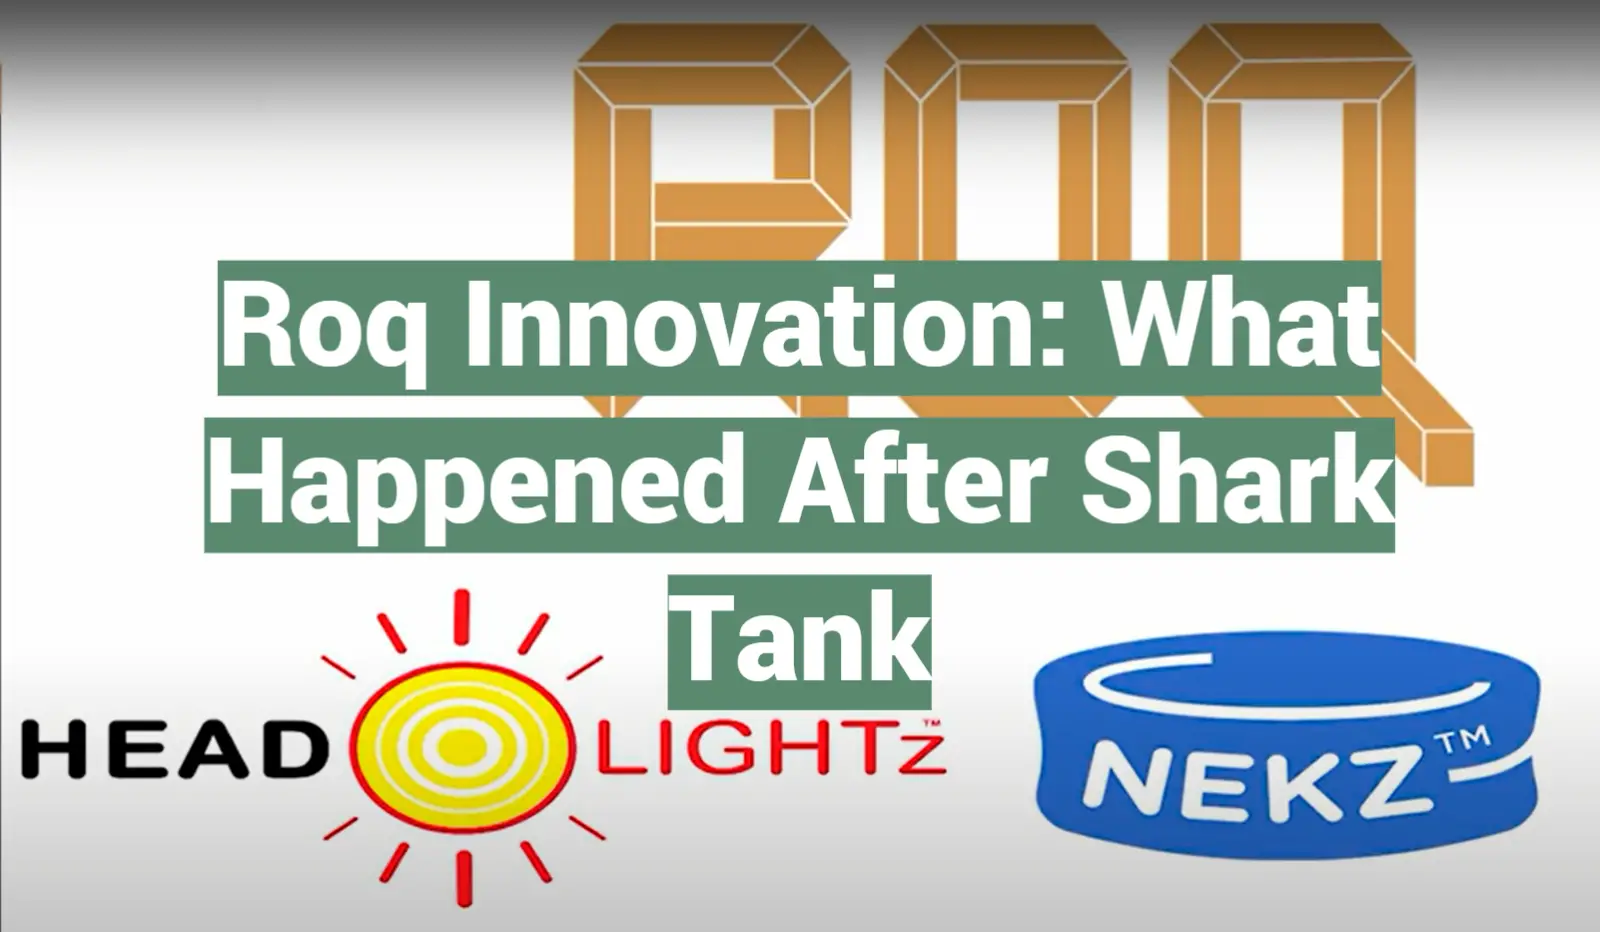 Roq Innovation: What Happened After Shark Tank